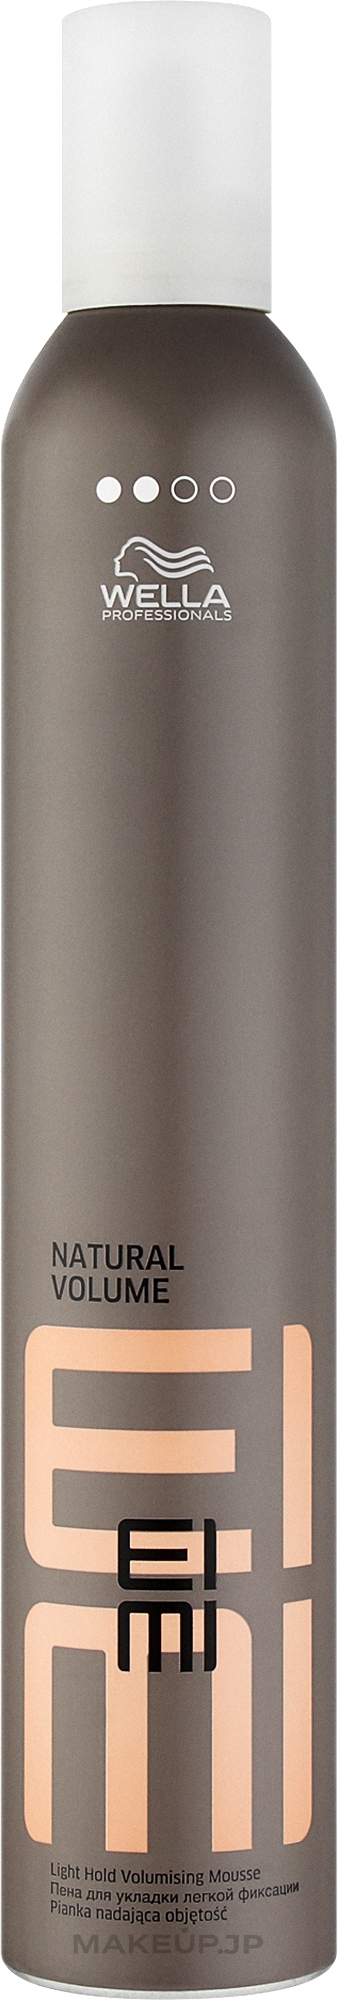 Light Hold Hair Styling Foam - Wella Professionals EIMI Styling Natural Volume — photo 500 ml